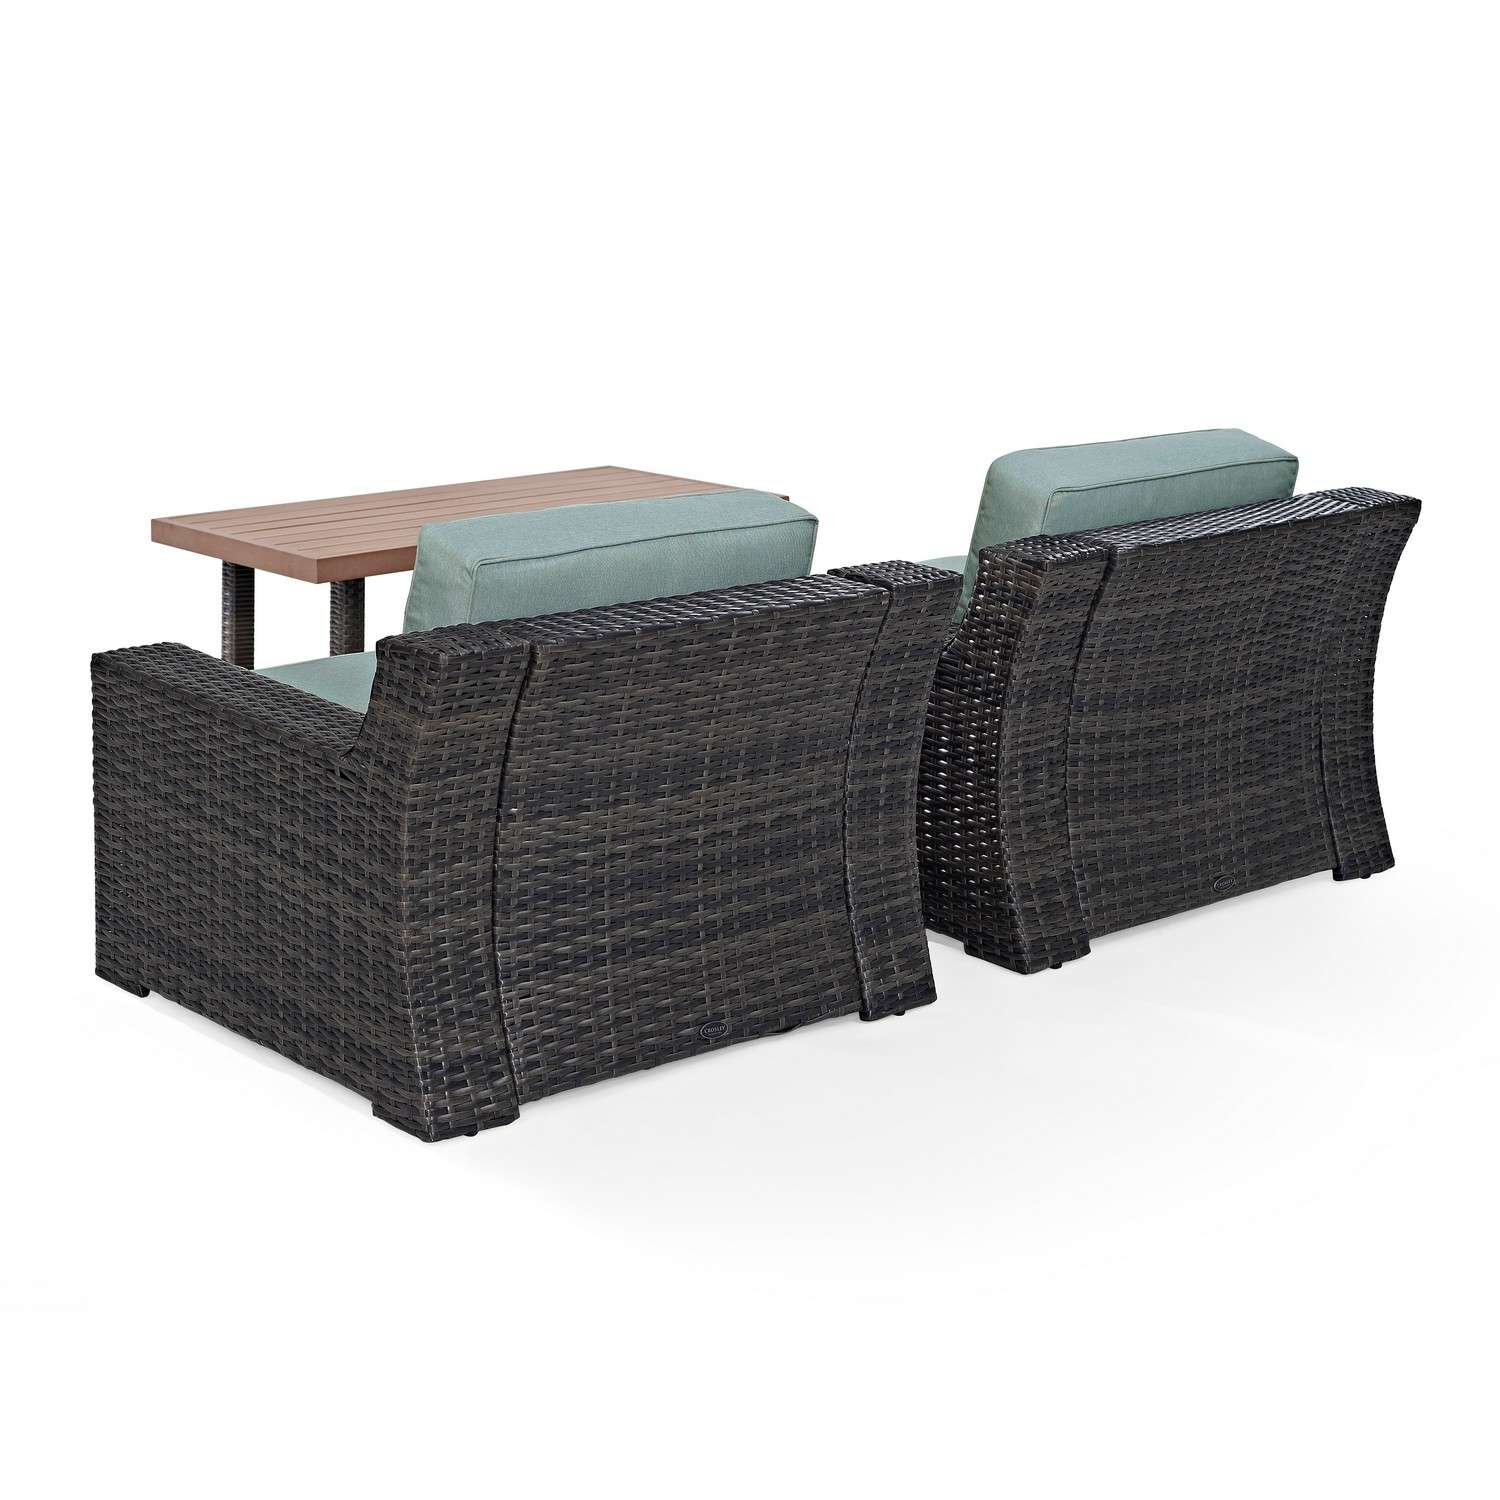 Crosley Beaufort 3-PC Outdoor Wicker Chair Set - Coffee Table and 2 Chairs - Mist/Brown